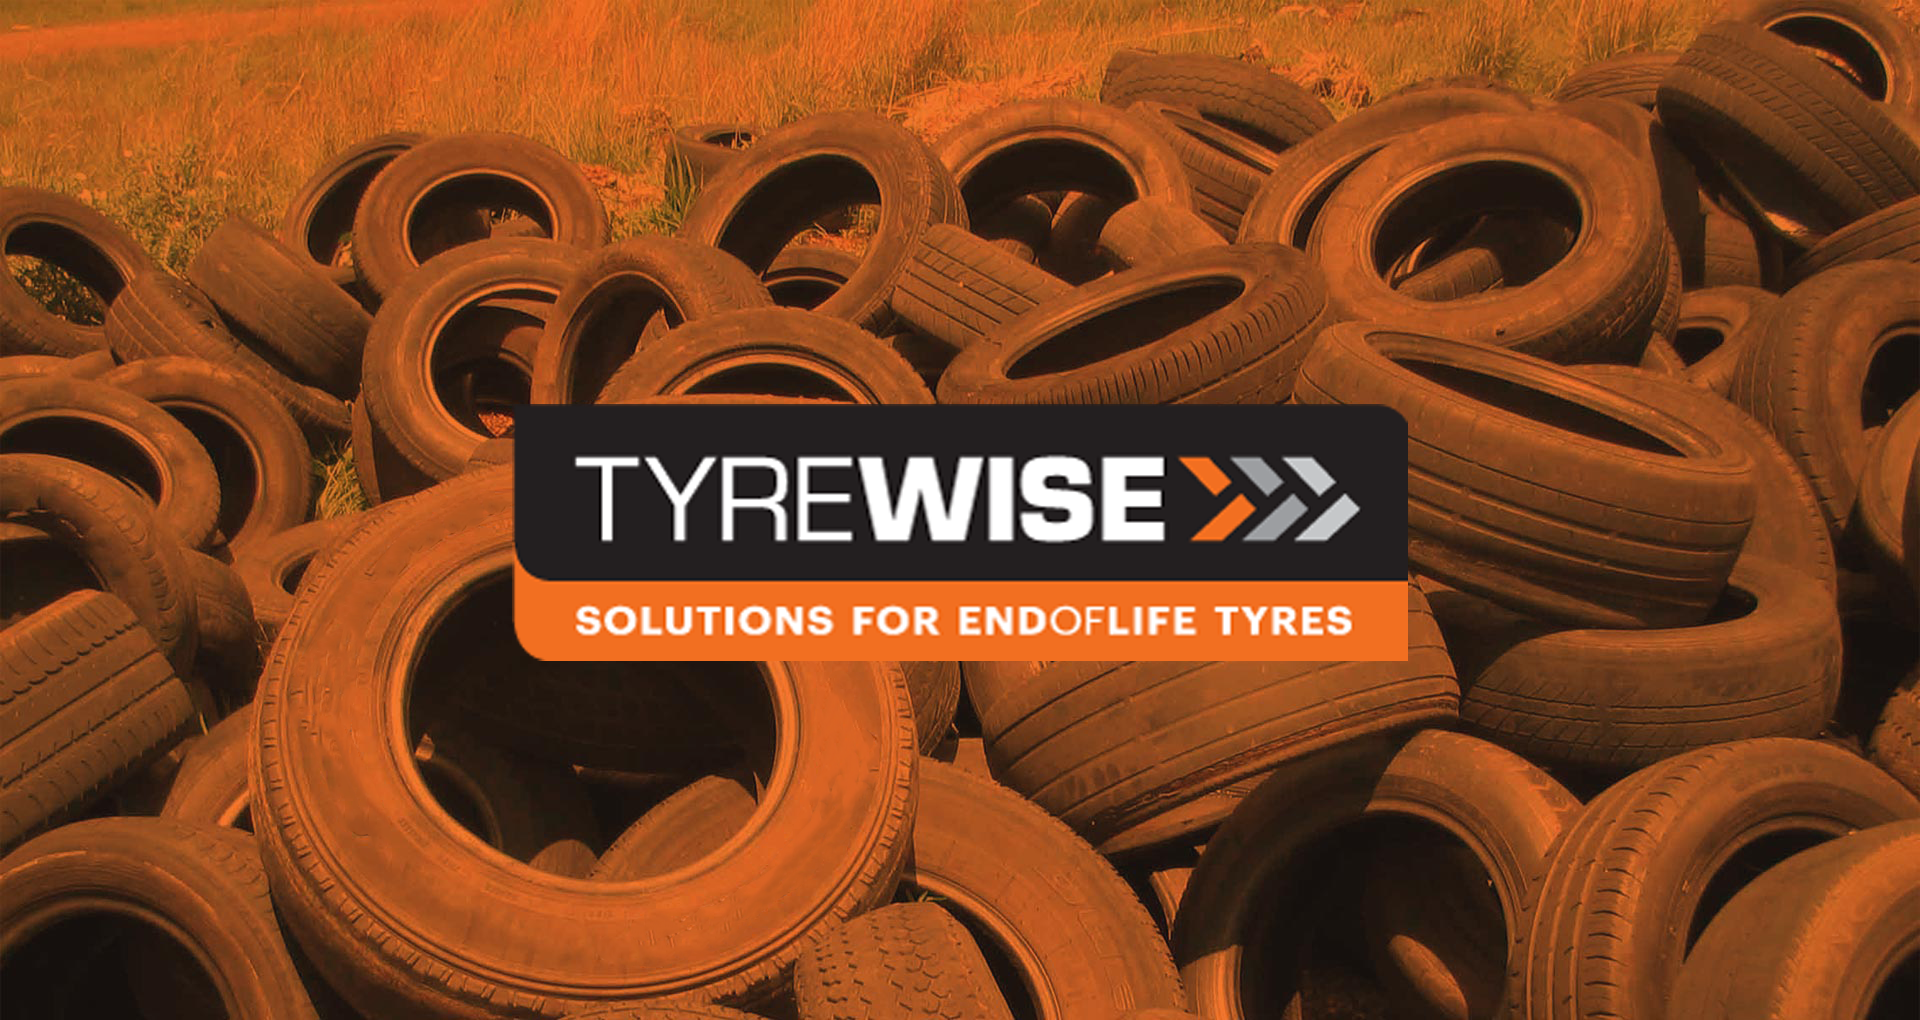 New Zealand’s first nationwide, regulated tyre product stewardship scheme set to start in 2023